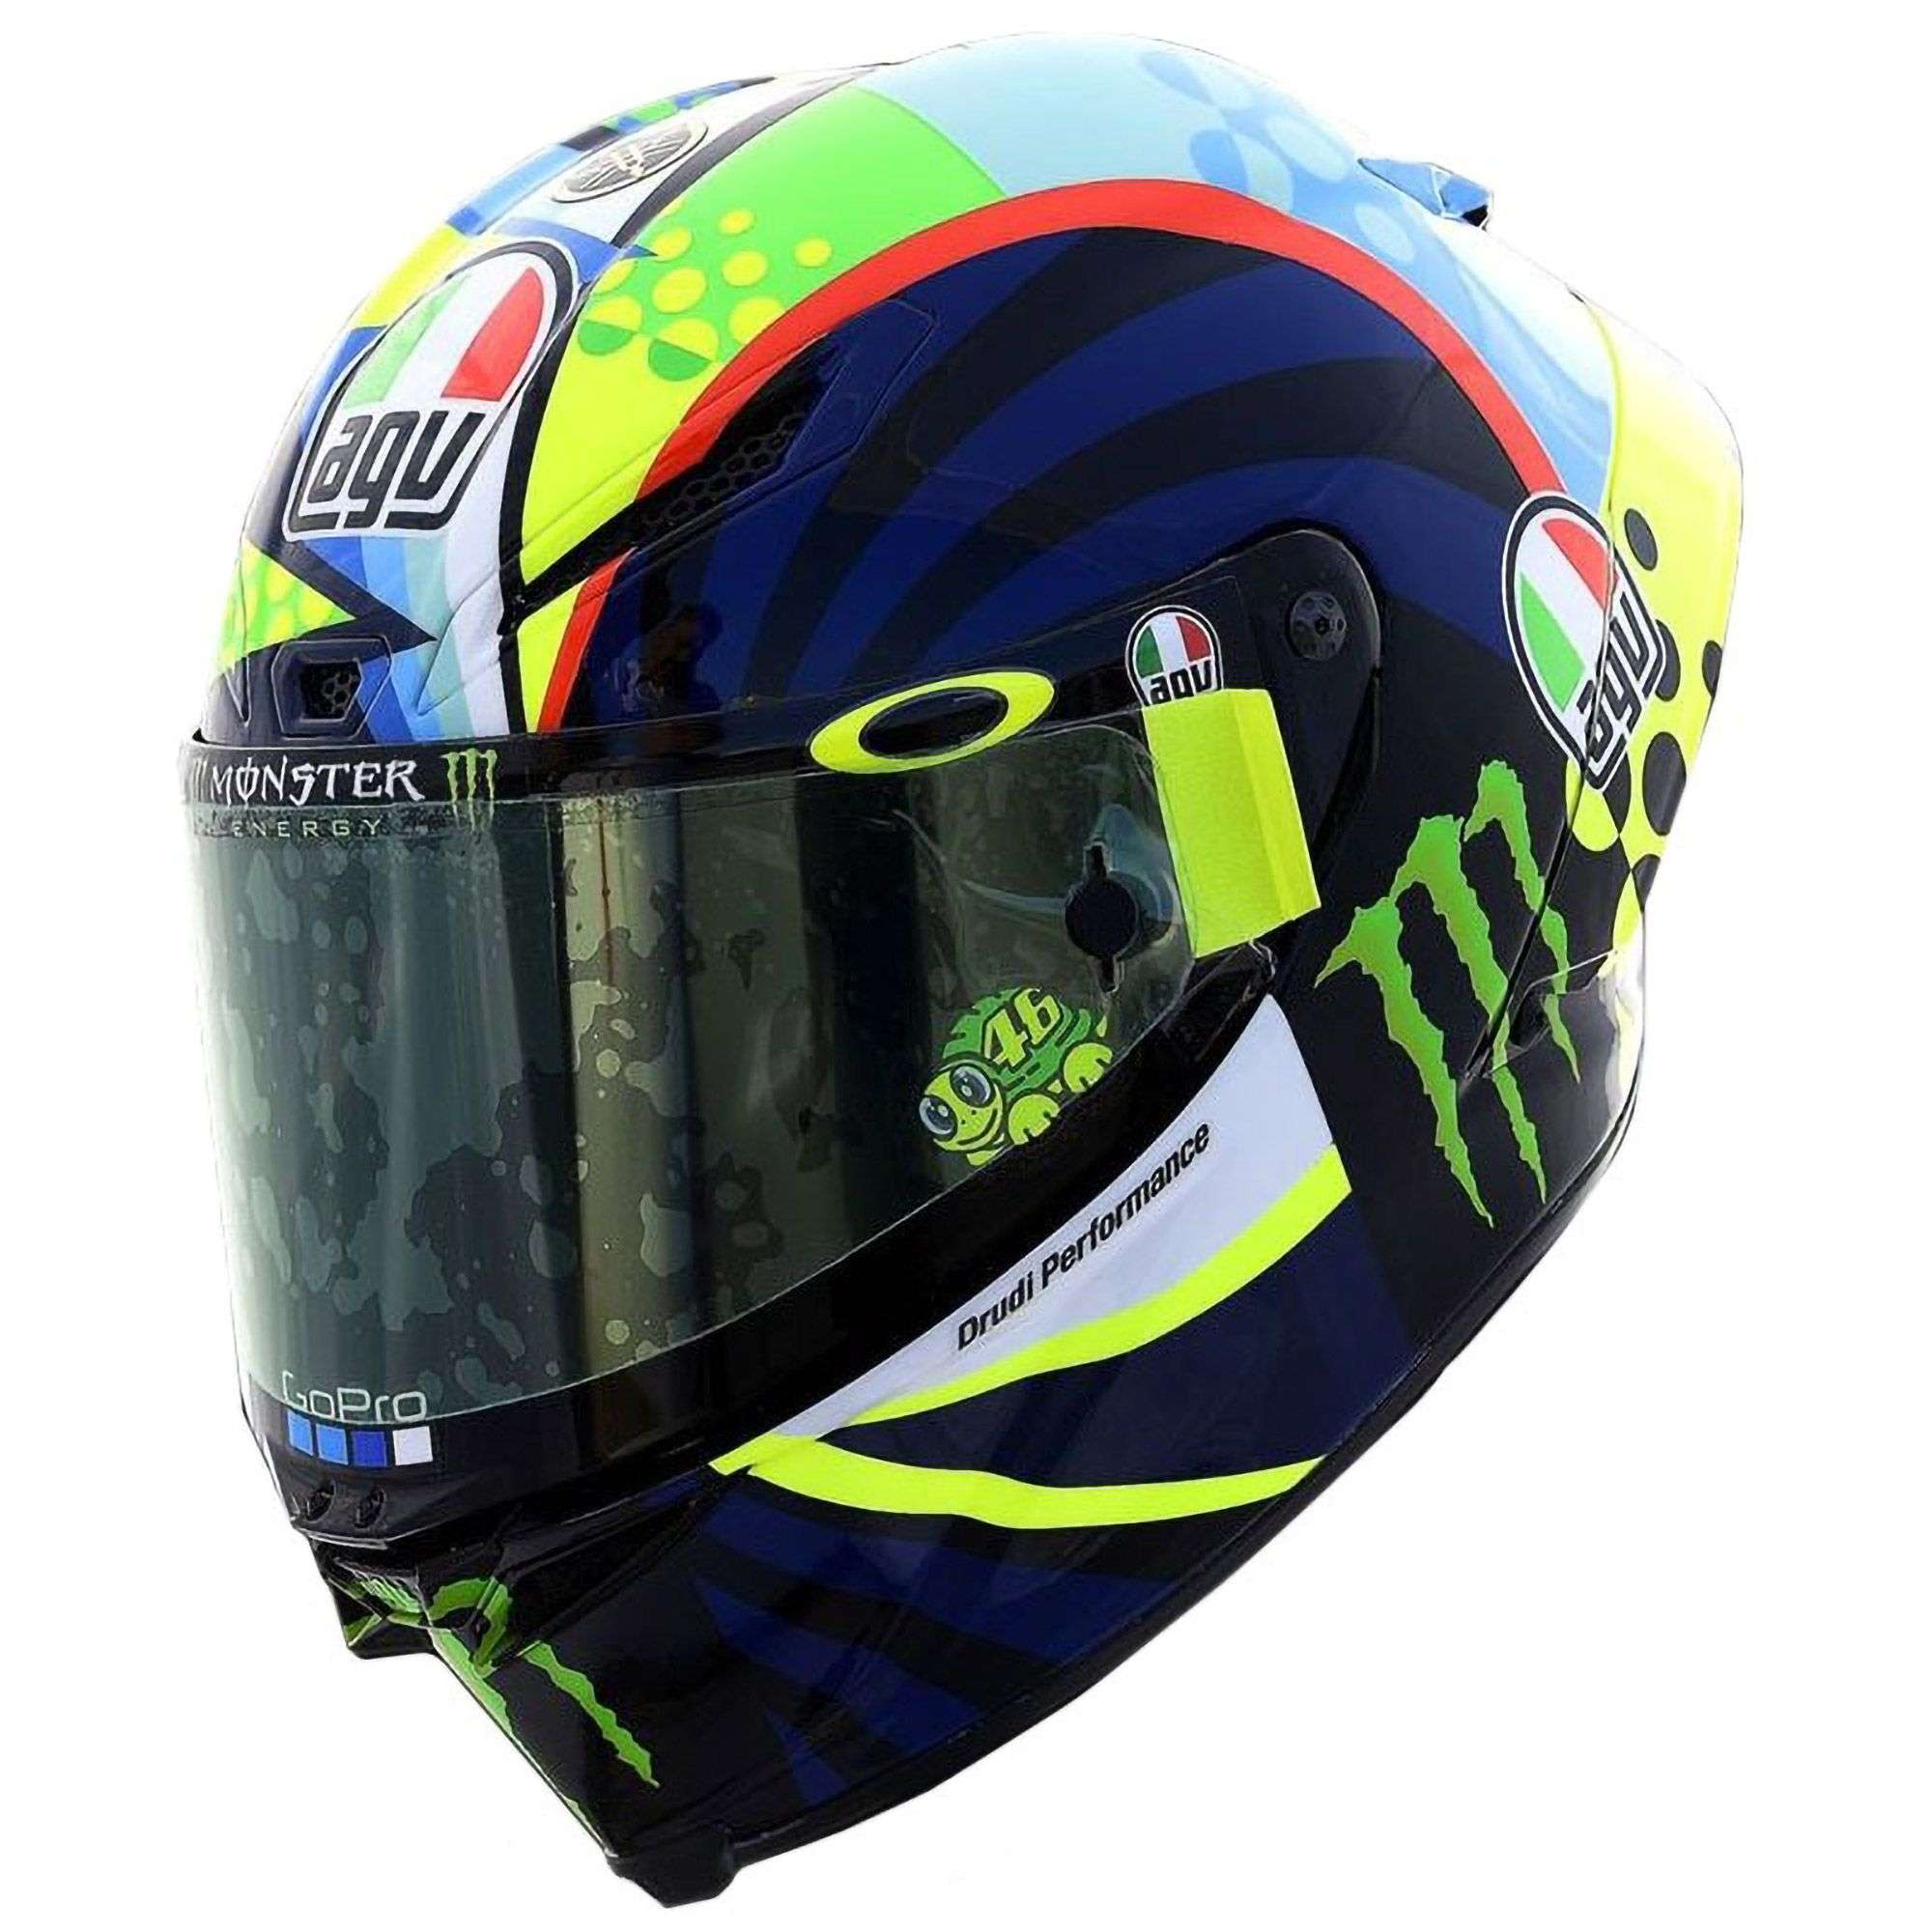 Full Face Motorcycle Helmet > AGV Pista GP RR Limited Edition Rossi ...